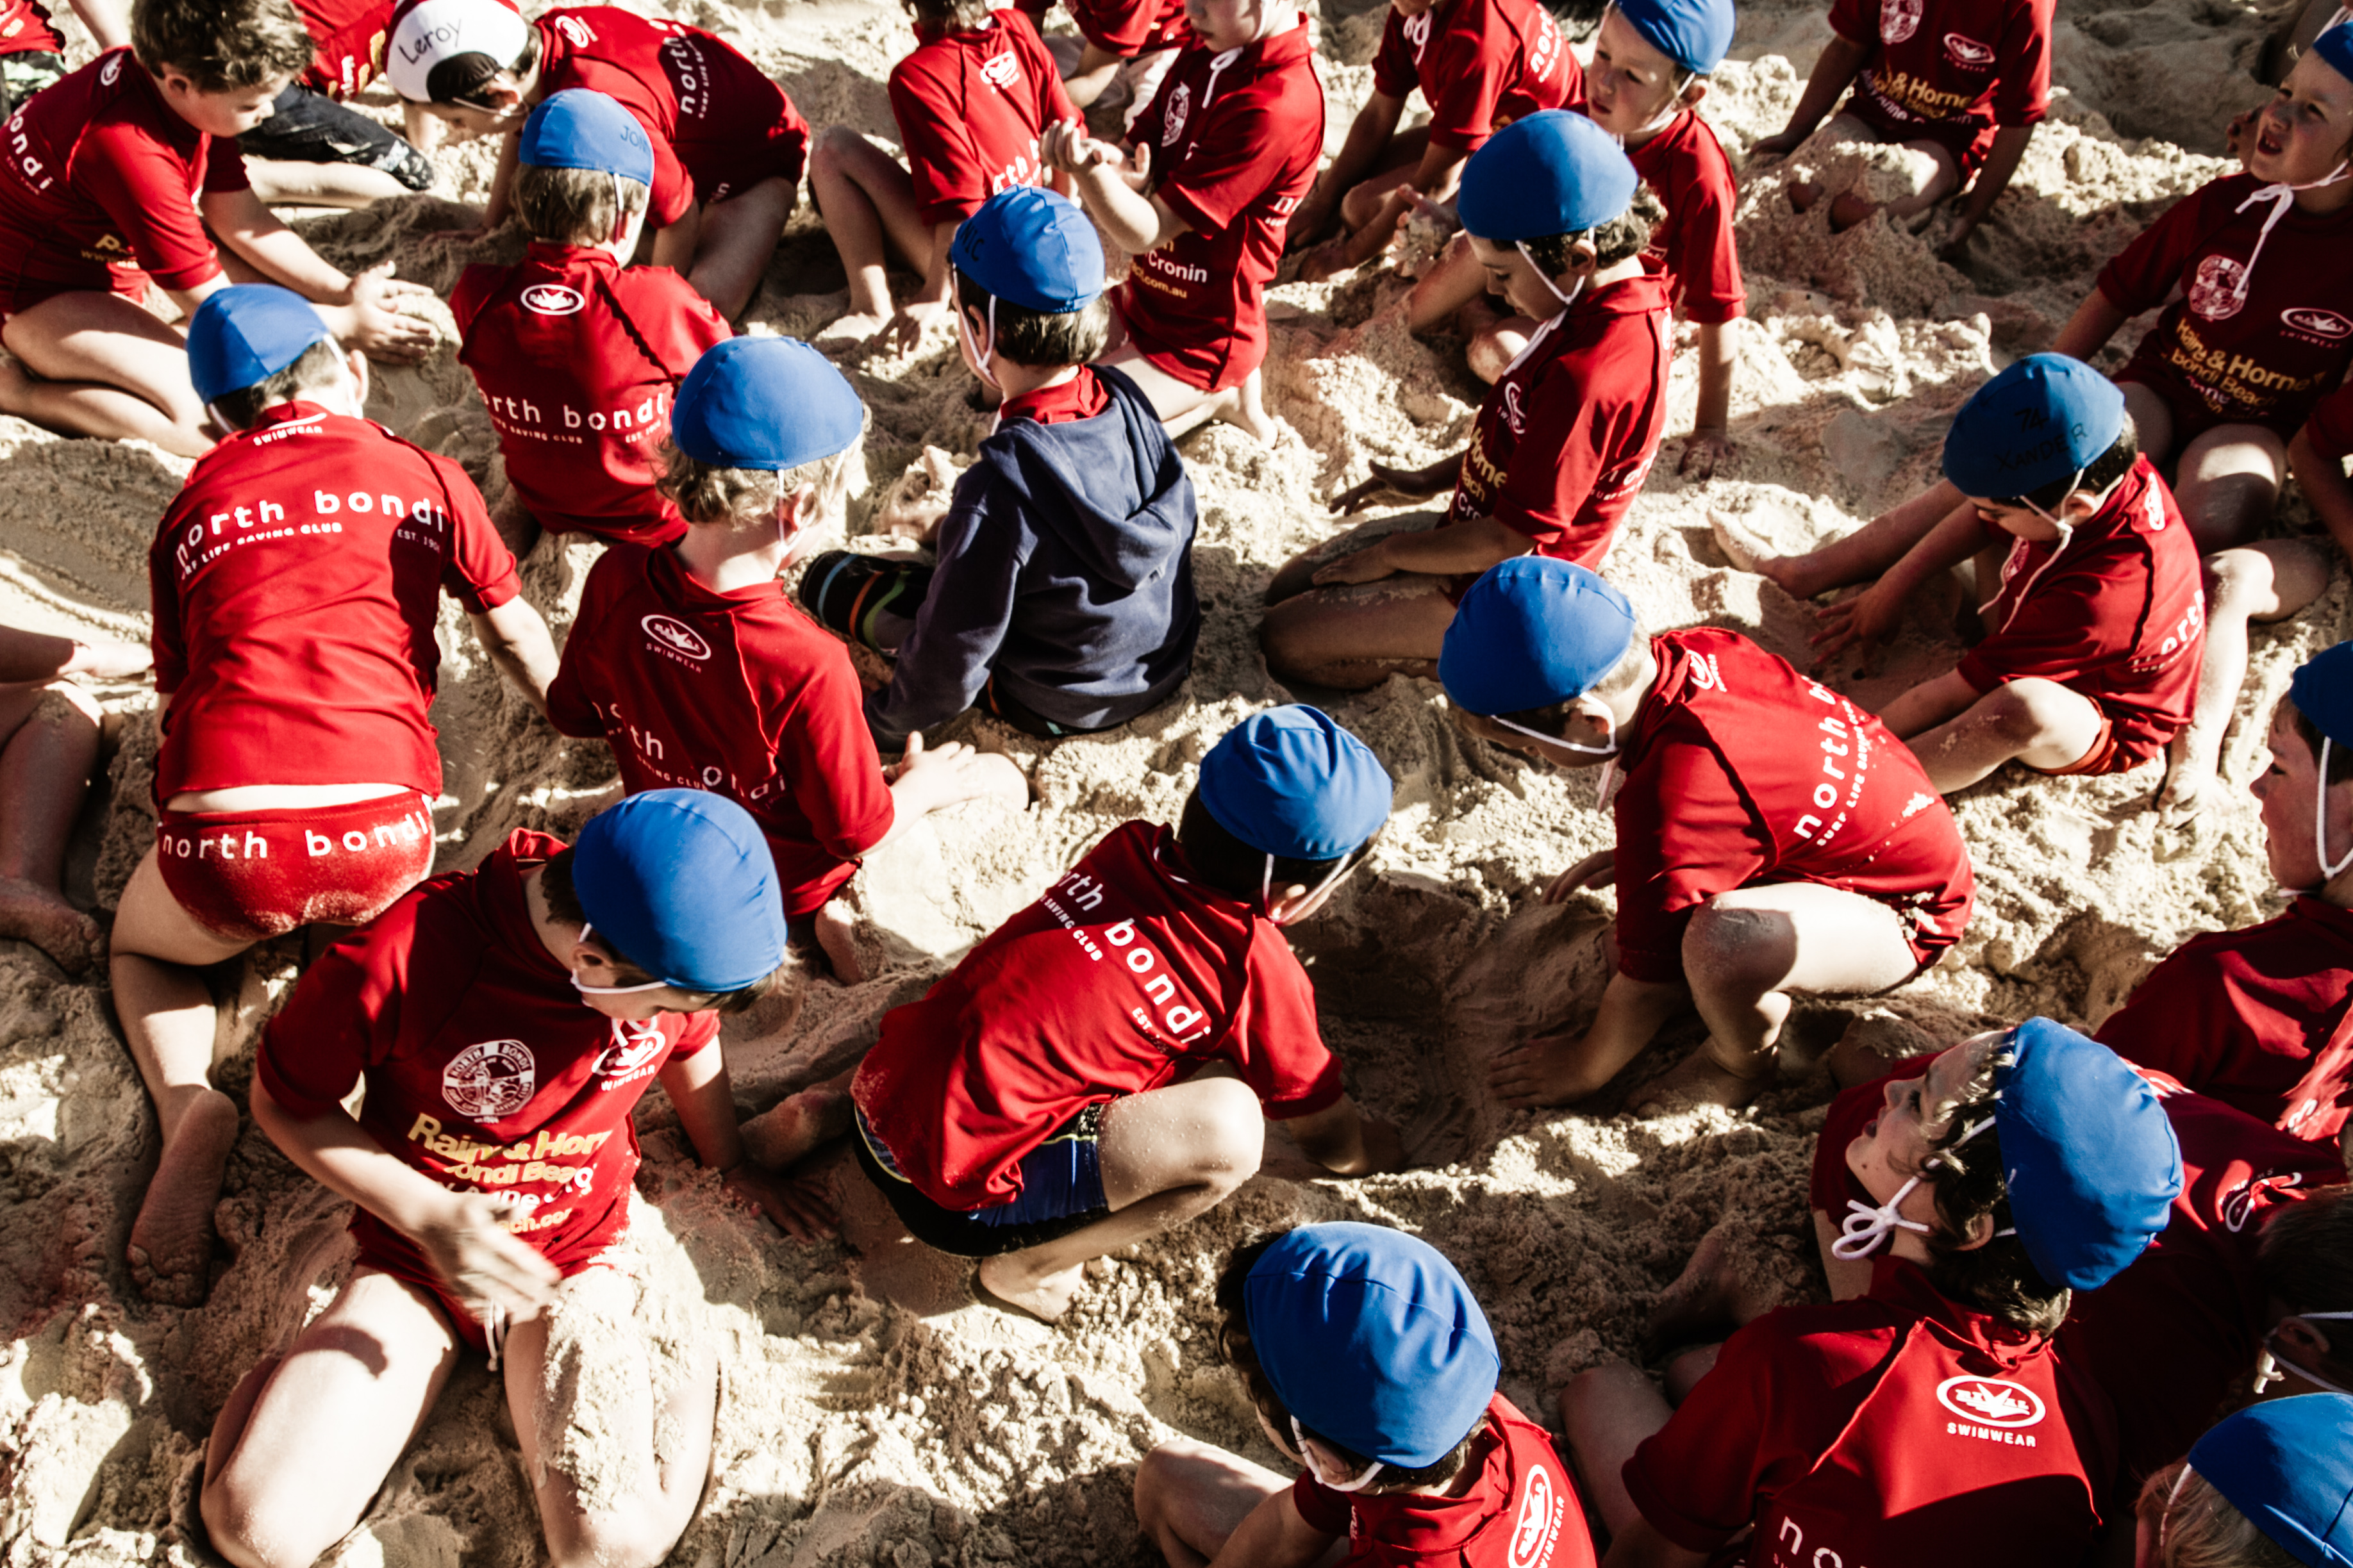 Children with their nippers uniforms playing on the sand